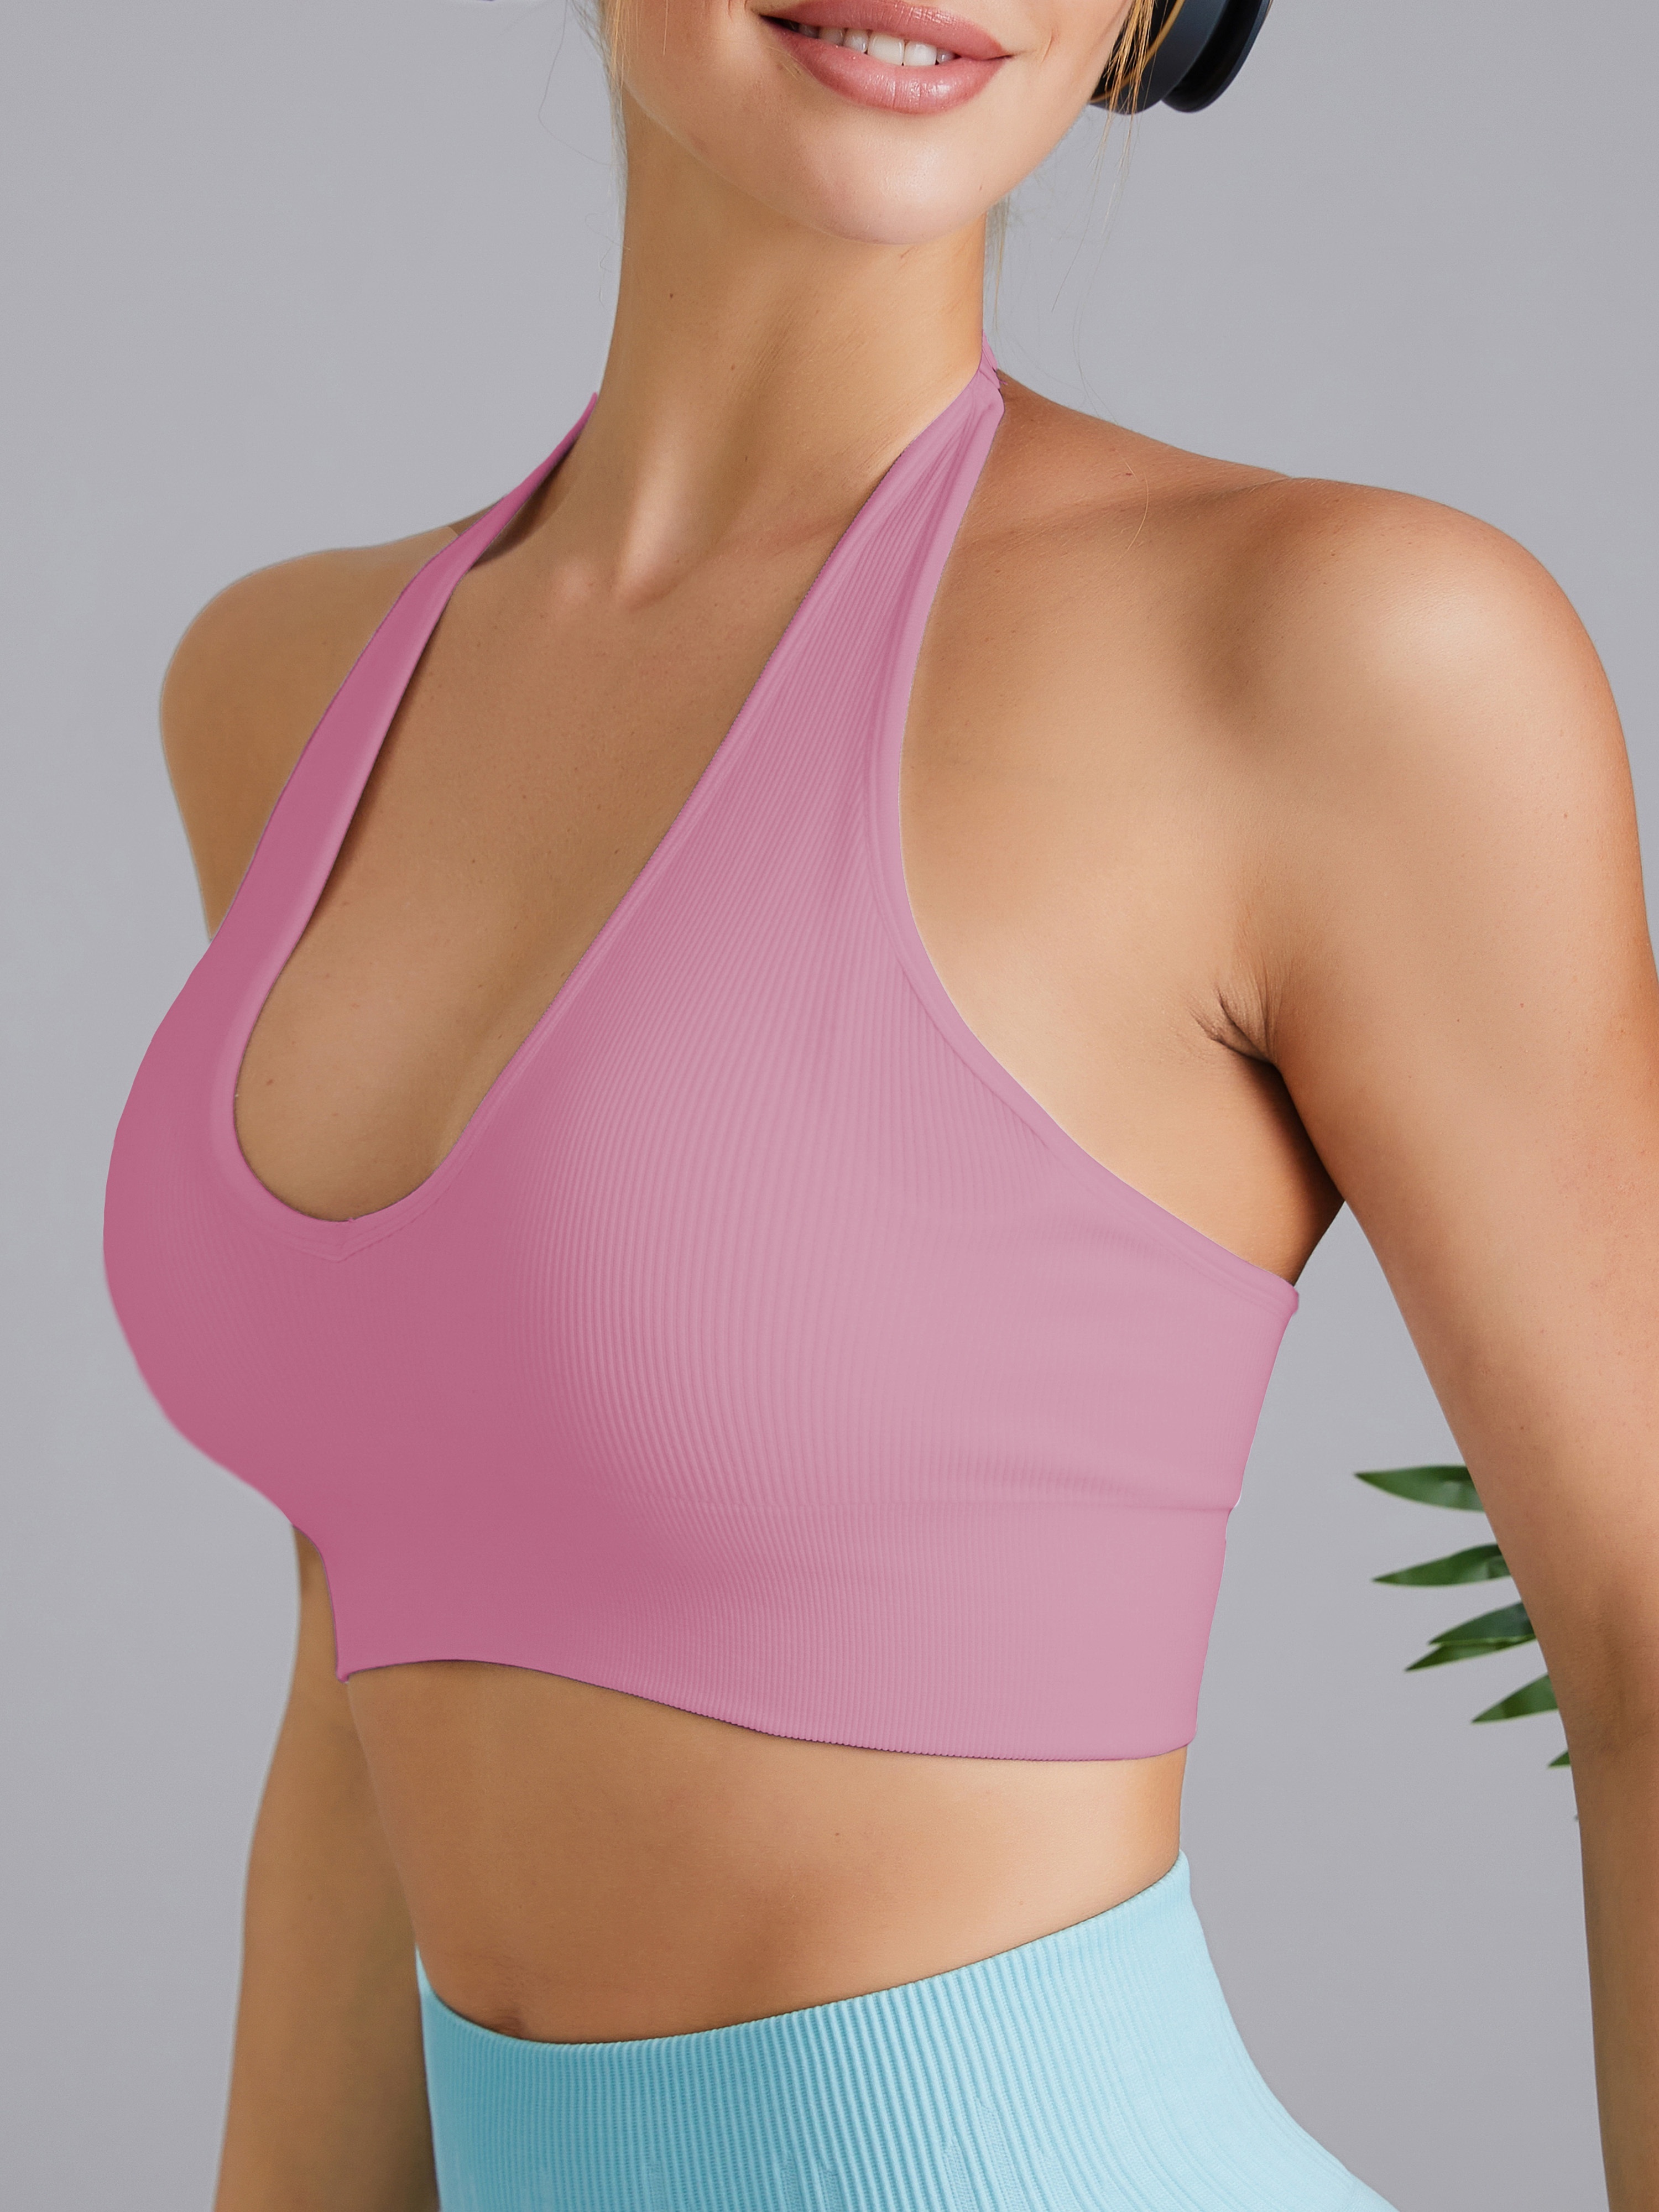 Sexy Laser Reflective Deep V Runderwear Bra For Women Perfect For Fitness,  Gym, Yoga And More! From Makeup99, $4.99